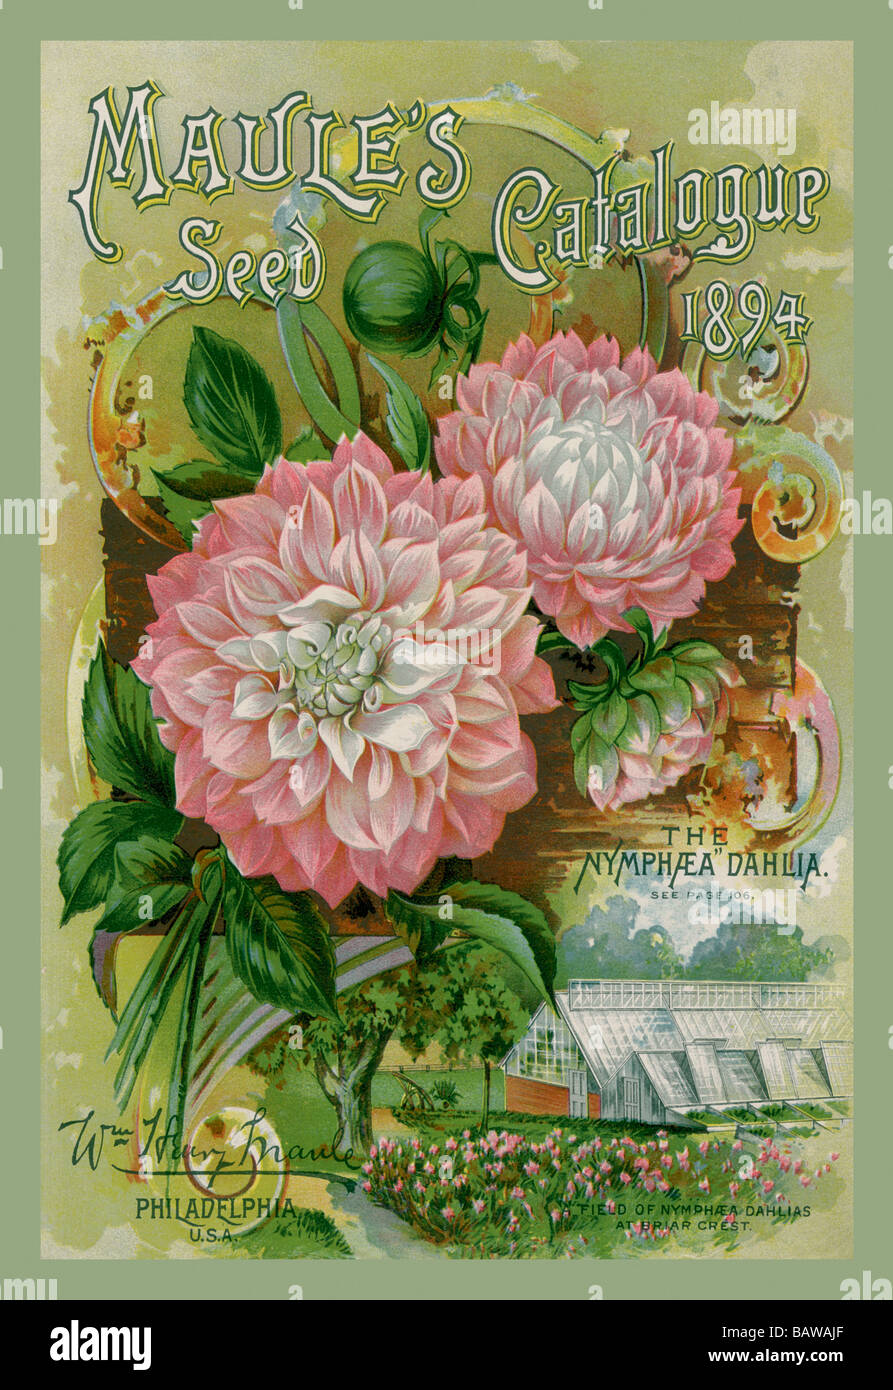 1899 Dreer's Bulbs Vintage Flowers Seed Packet Catalogue Advertisement Poster